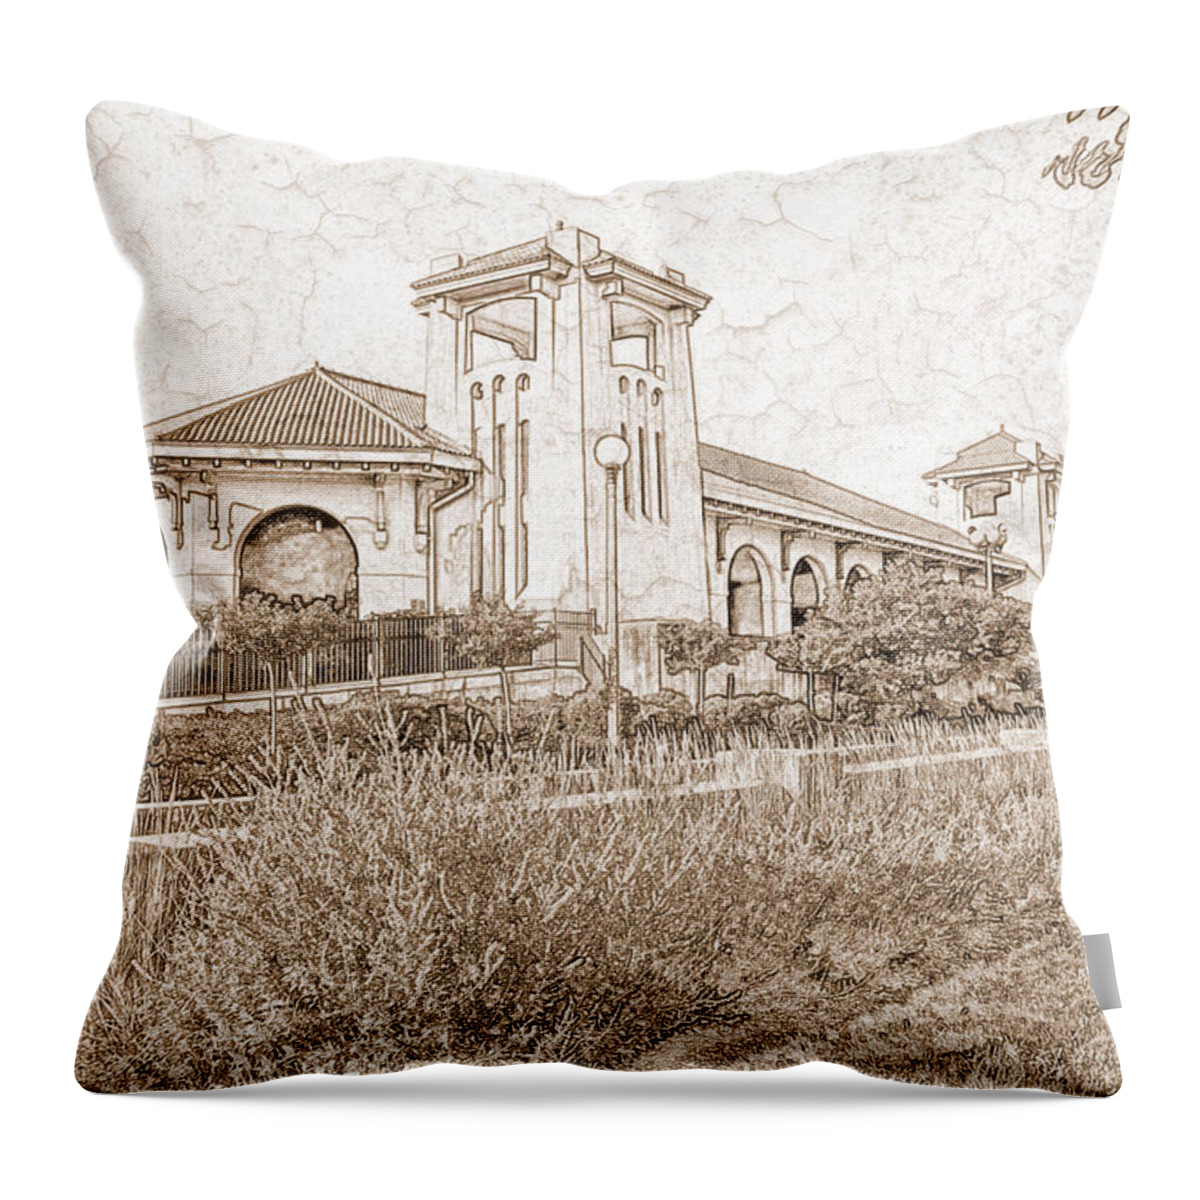 World's Fair Throw Pillow featuring the photograph World's Fair Pavilion at Forest Park St Louis by Greg Kluempers